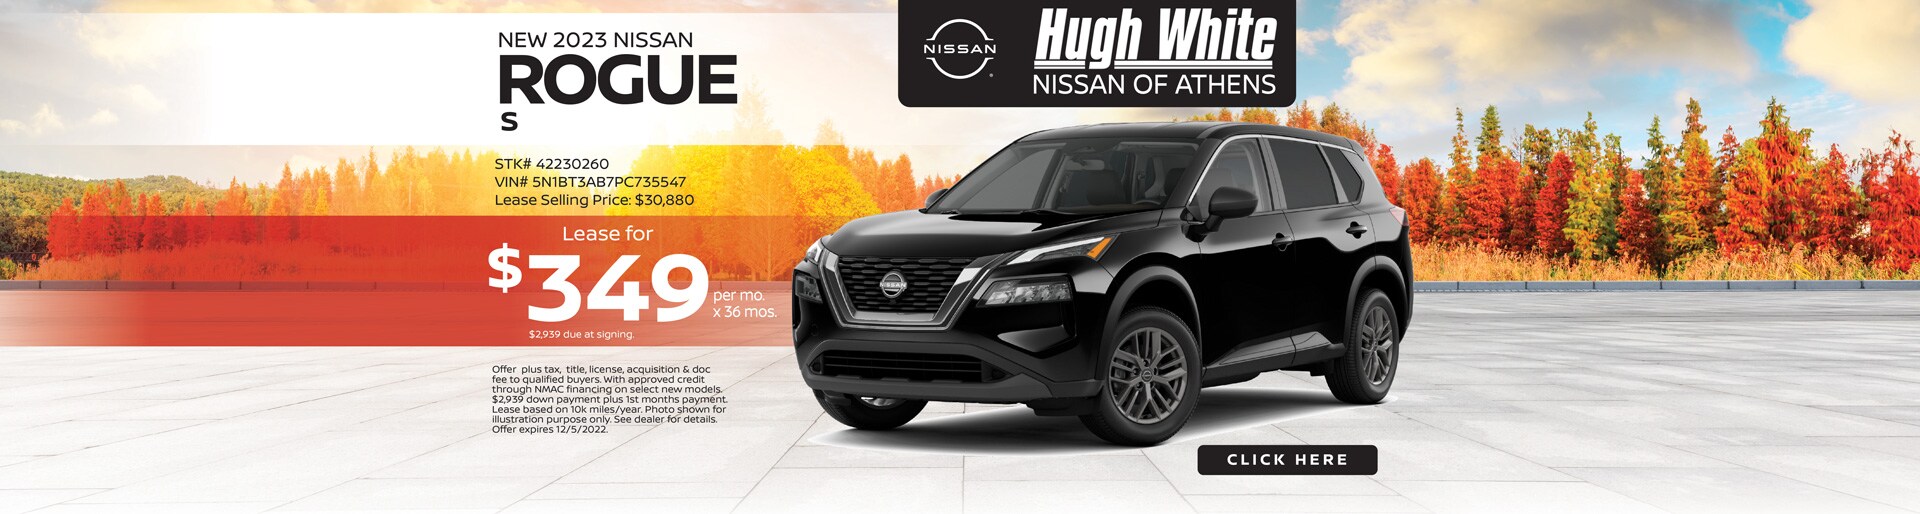 2023 Nissan Rogue Lease Offer | Hugh White Nissan Athens